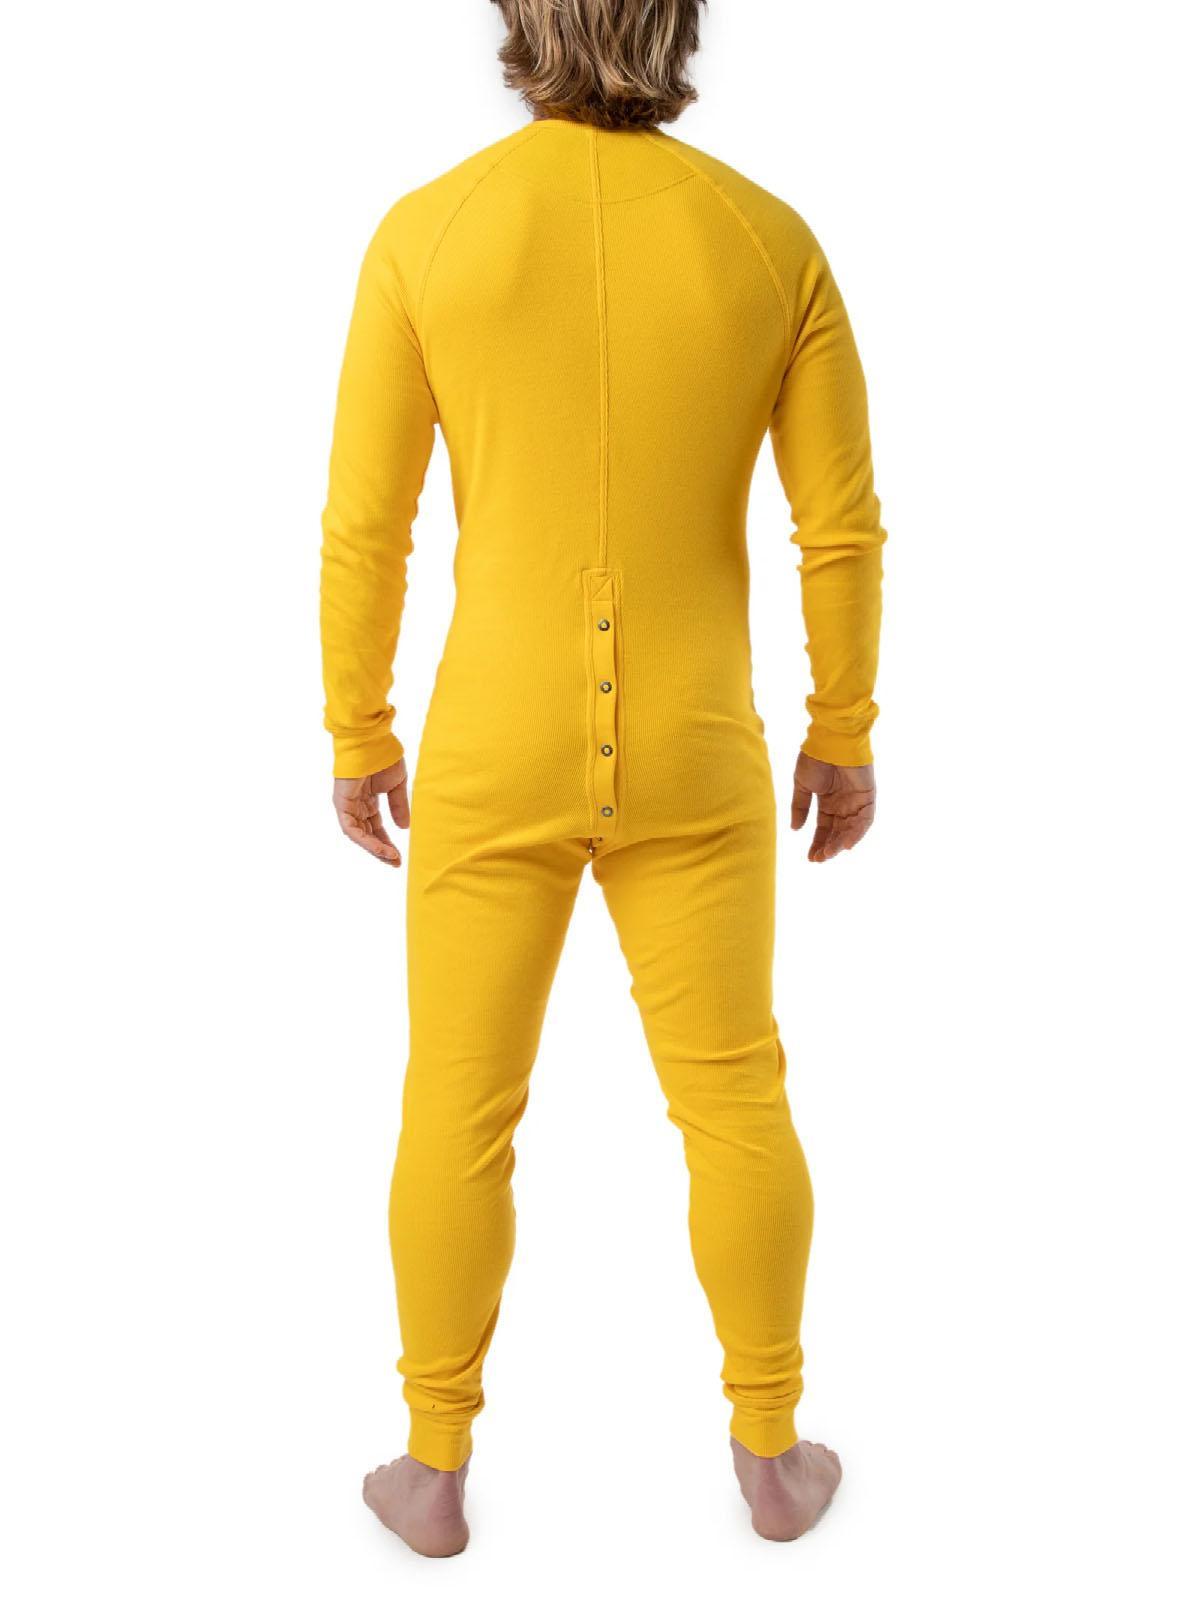 NASTY PIG UNION SUIT ELECTRIC YELLOW - FullKit.com